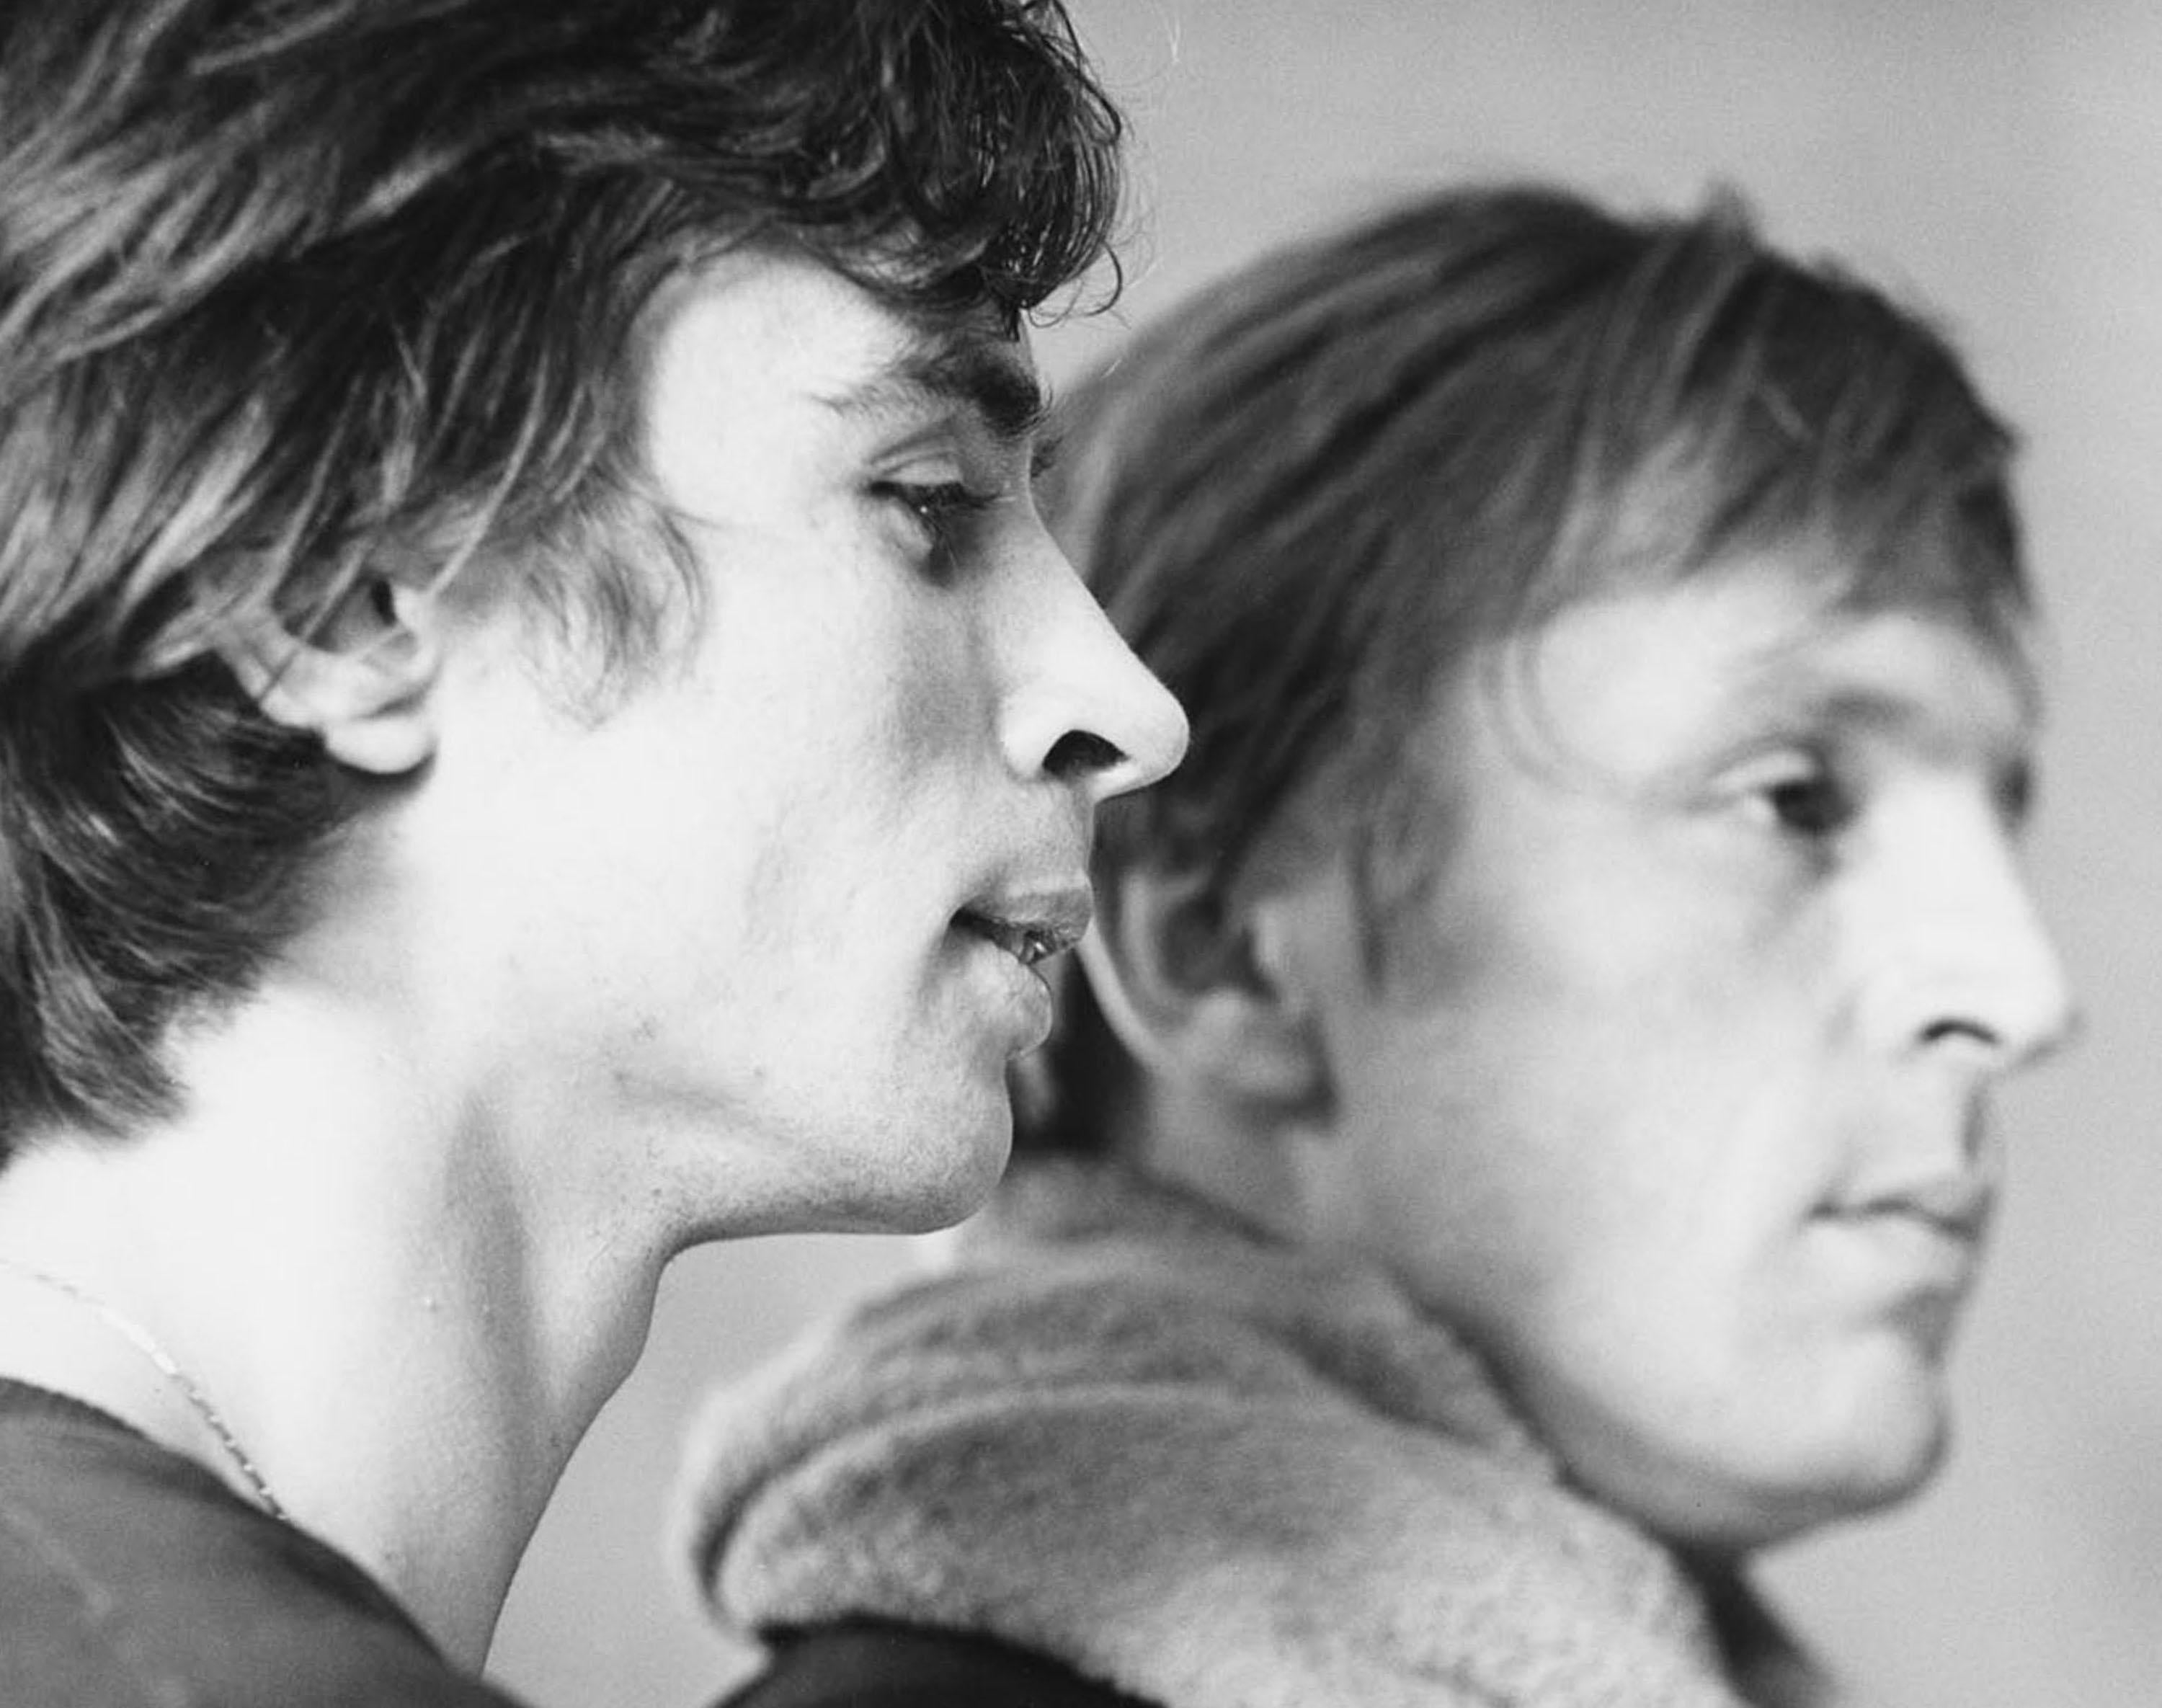 Rudolf Nureyev and Erik Bruhn photographed rehearsing, January 20, 1962 - Photograph by Jack Mitchell